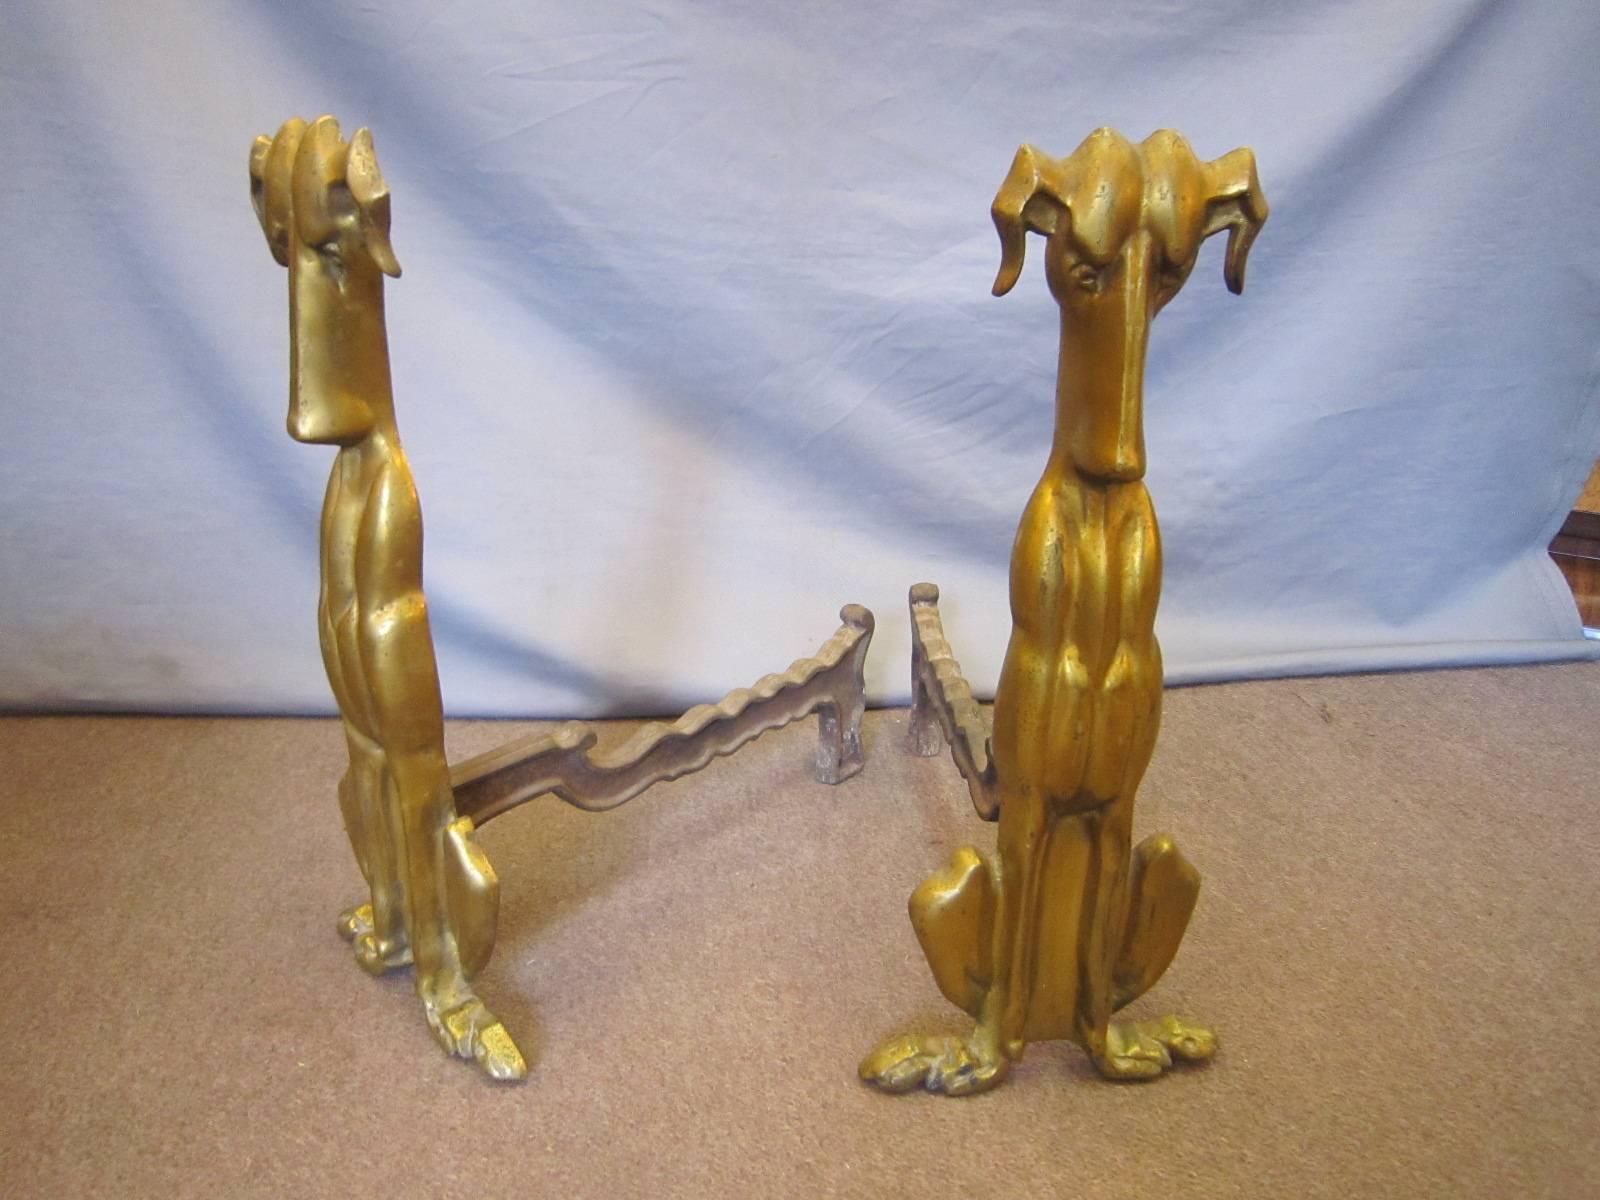 A pair of Art Deco bronze and iron dog andirons or log holder. 
Can even be used as a magazine rack.
Stamped: Tennessee chrome plating company
Original gilt patination, some surface wear and small spots commensurate with age and use.
 